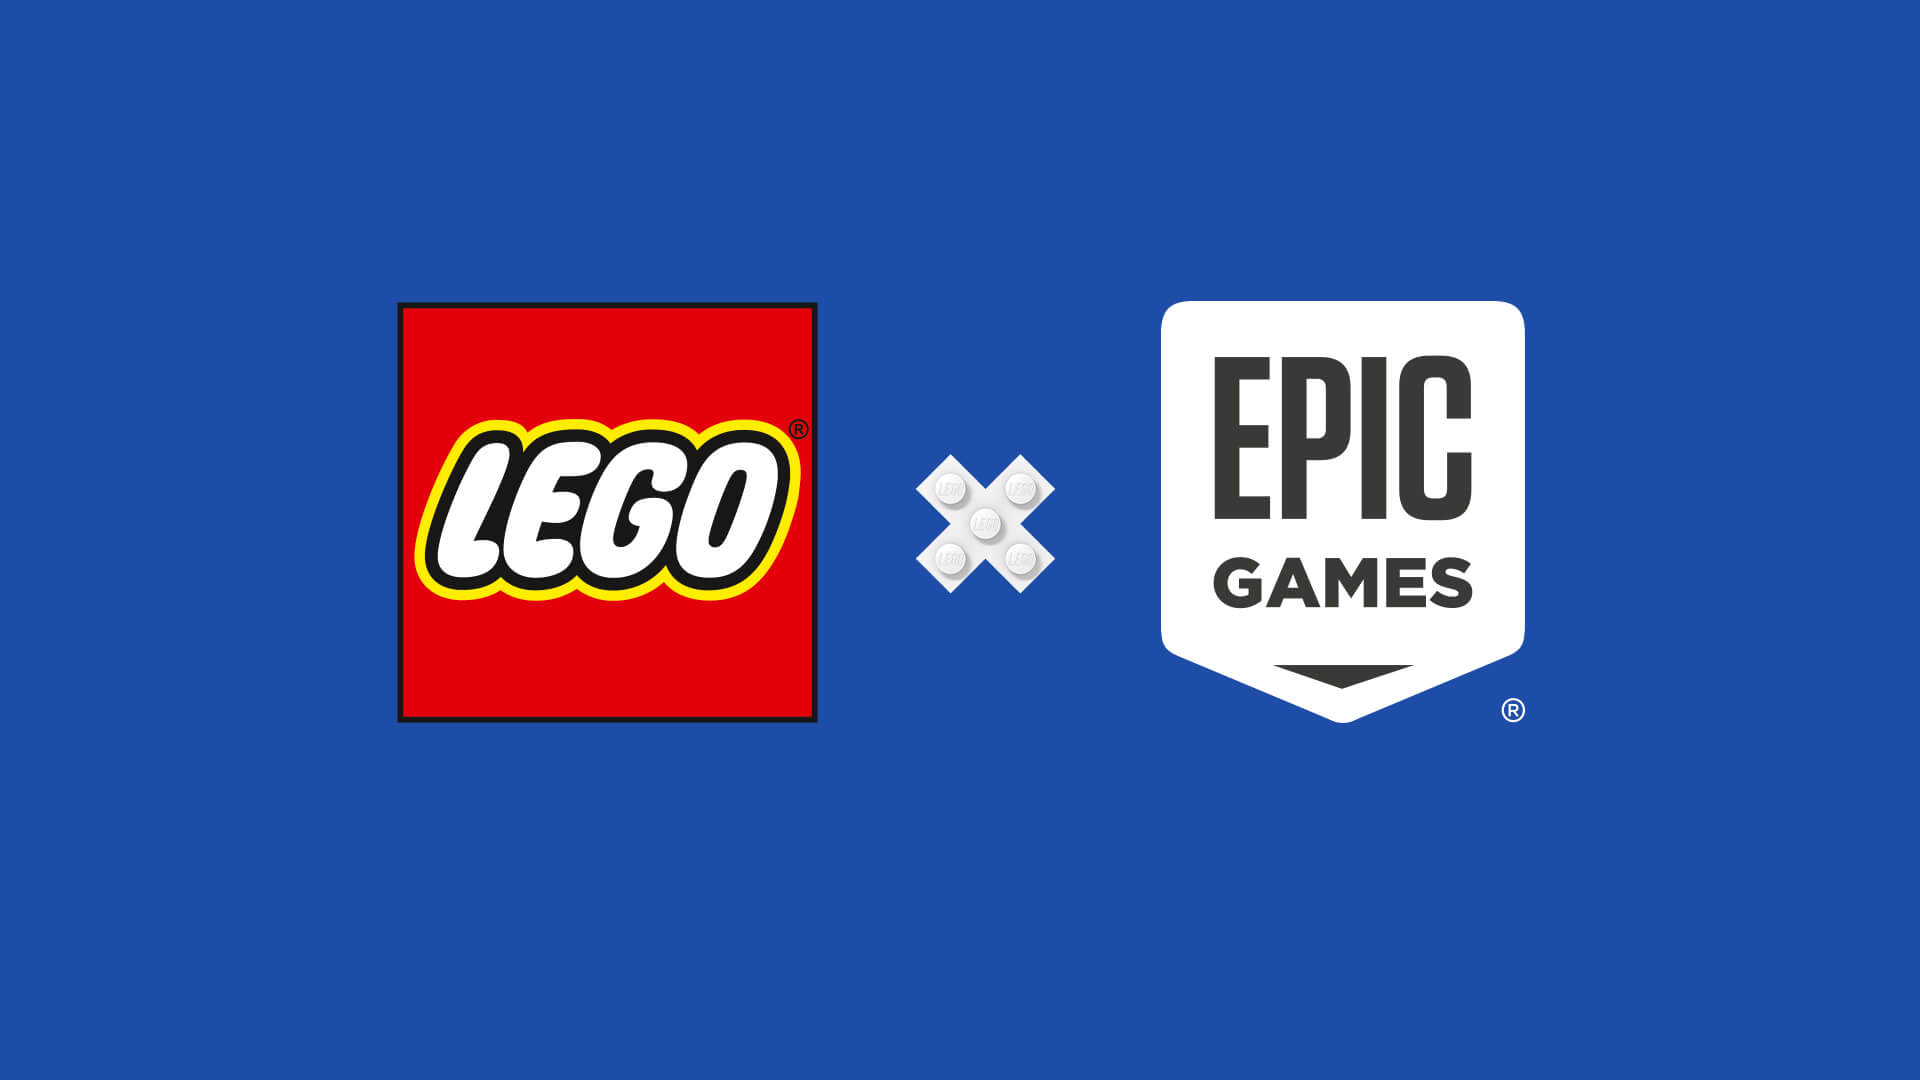 Epic Games and LEGO